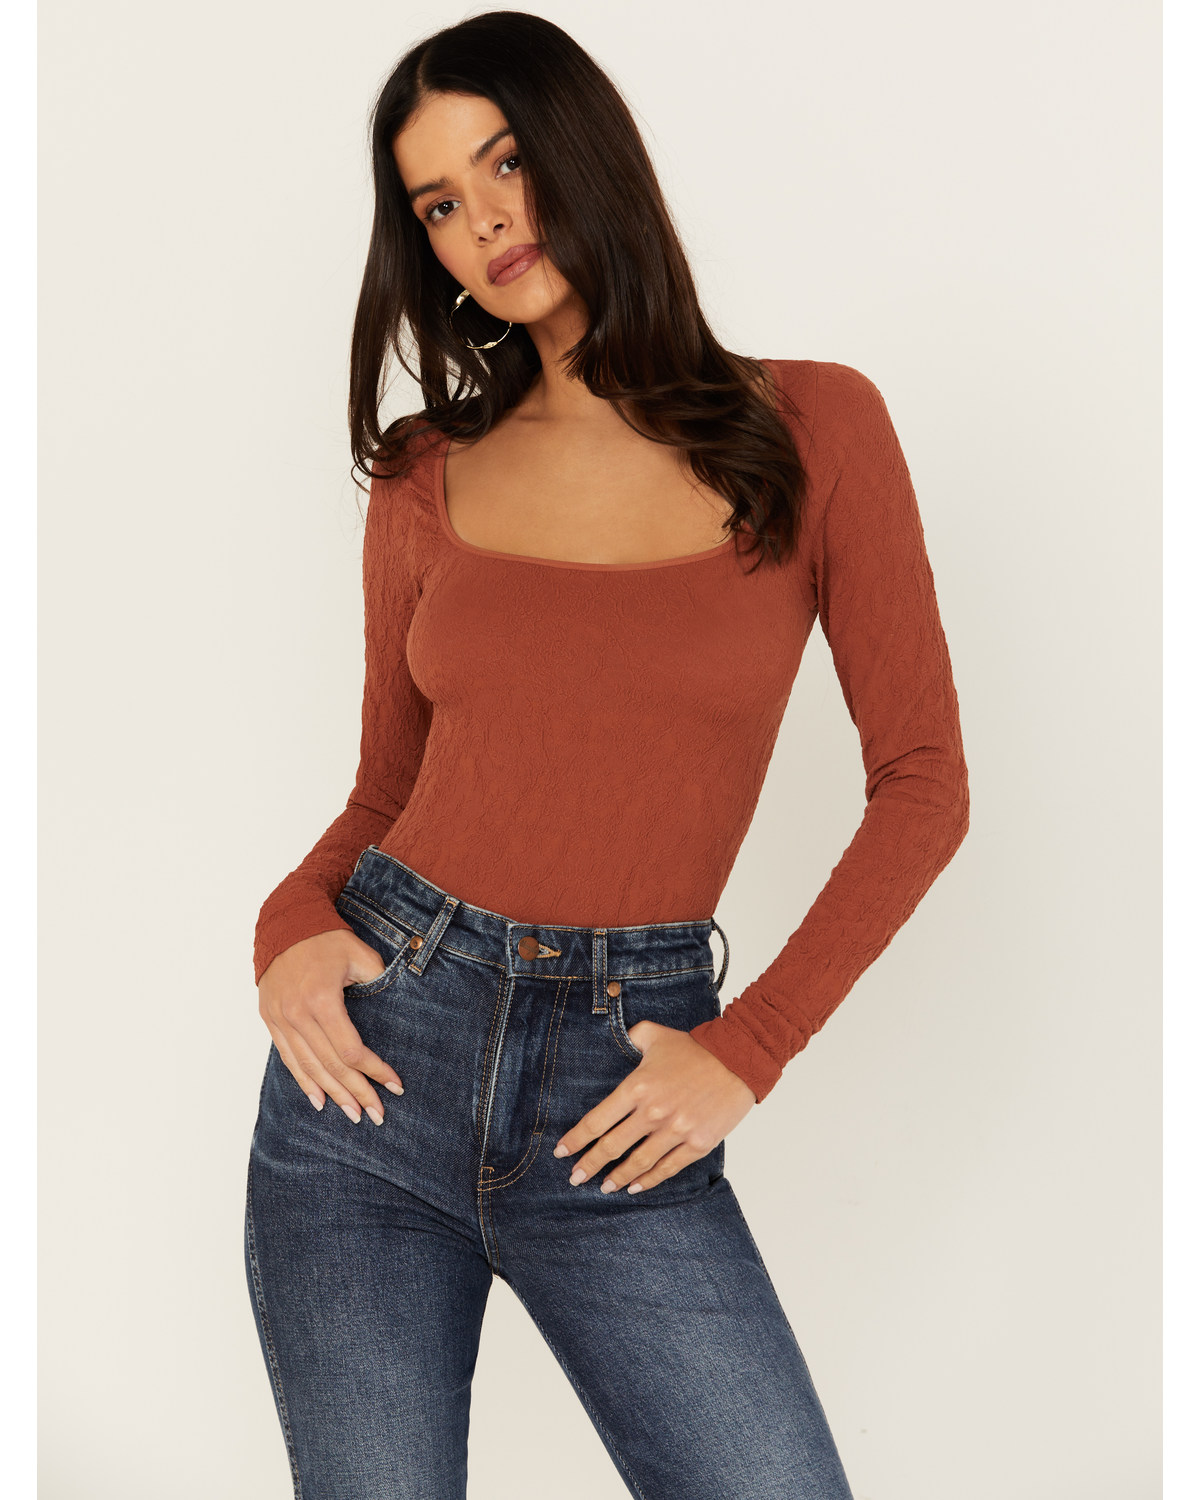 Free People Women's Have It All Long Sleeve Top